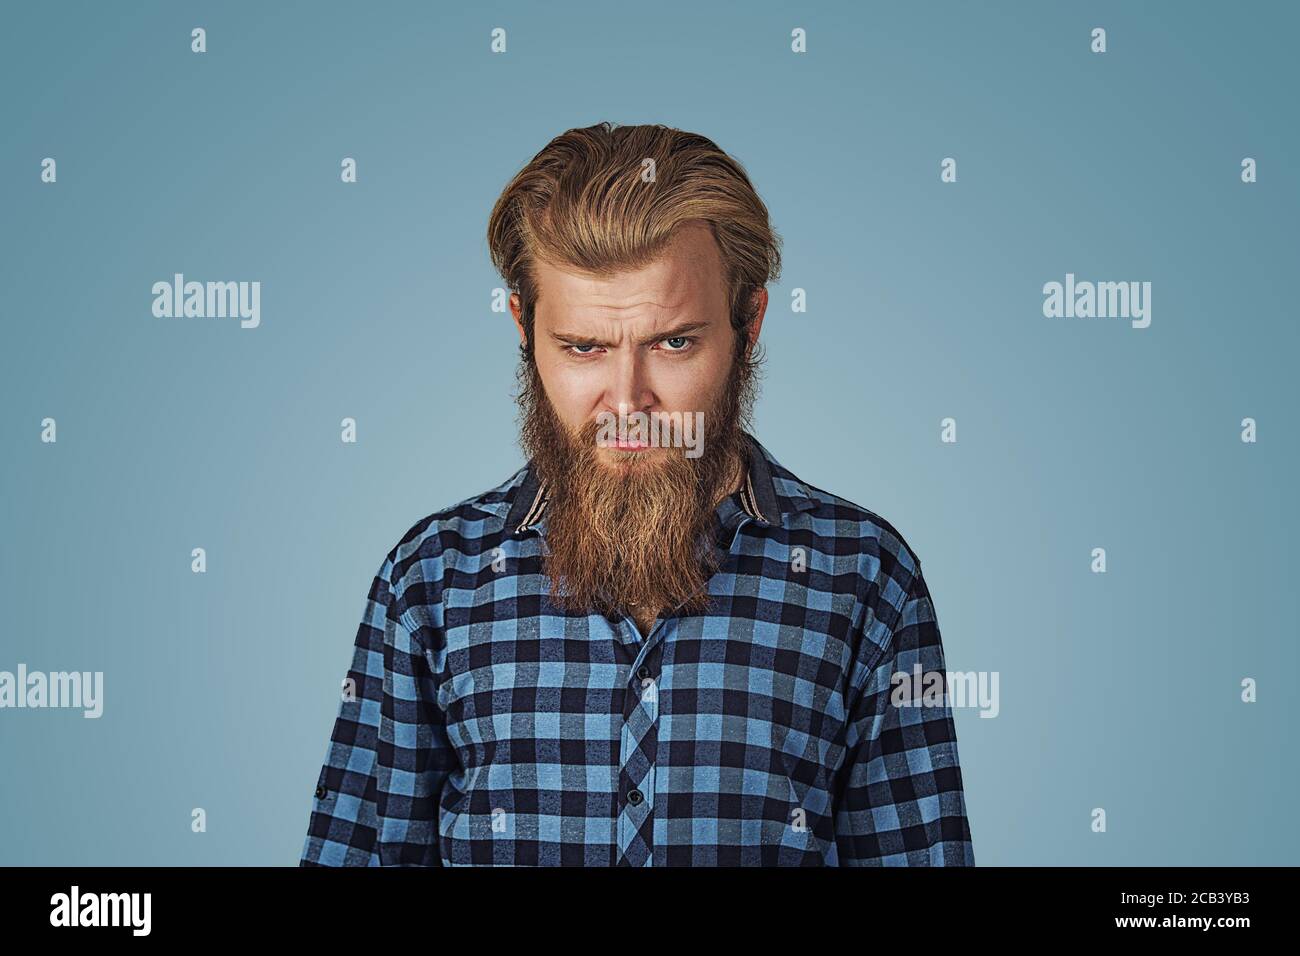 Closeup portrait of angry, annoyed, grumpy, mad man. Bad attitude, personality, interpersonal conflict resolution, intelligence. Hipster male with bea Stock Photo